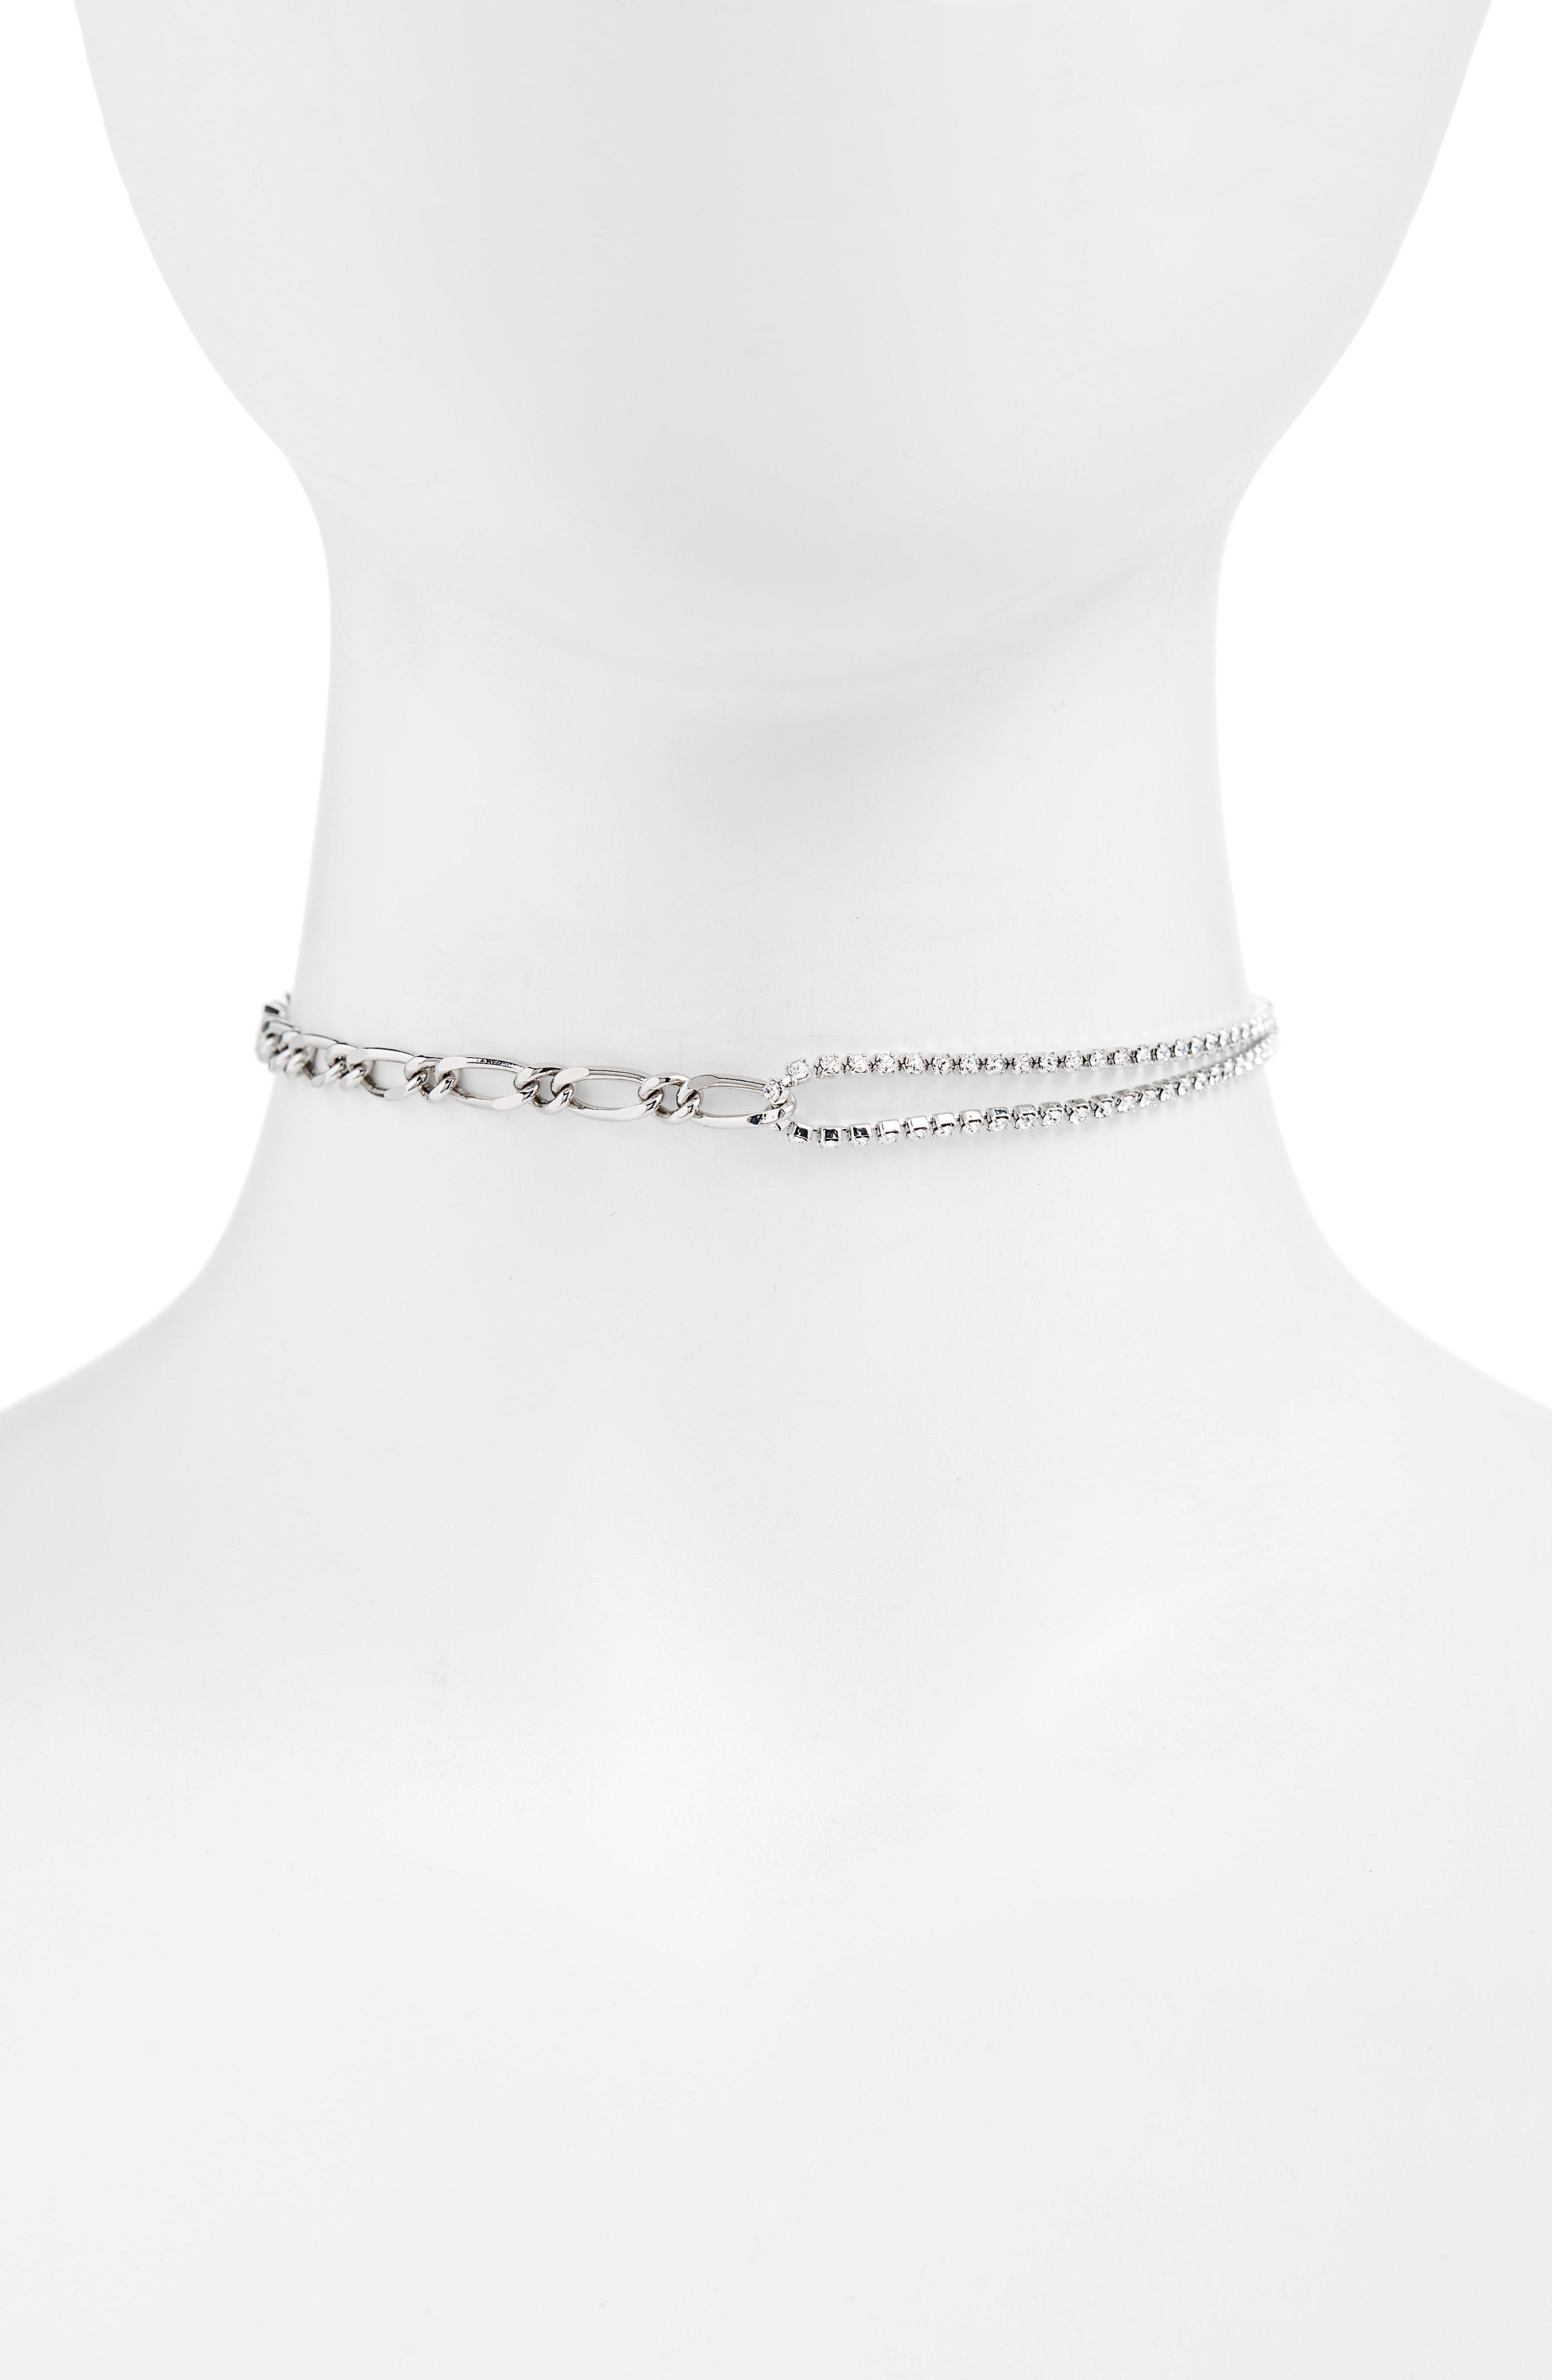 Lyst - Justine Clenquet Roxy Crystal & Chain Choker in White